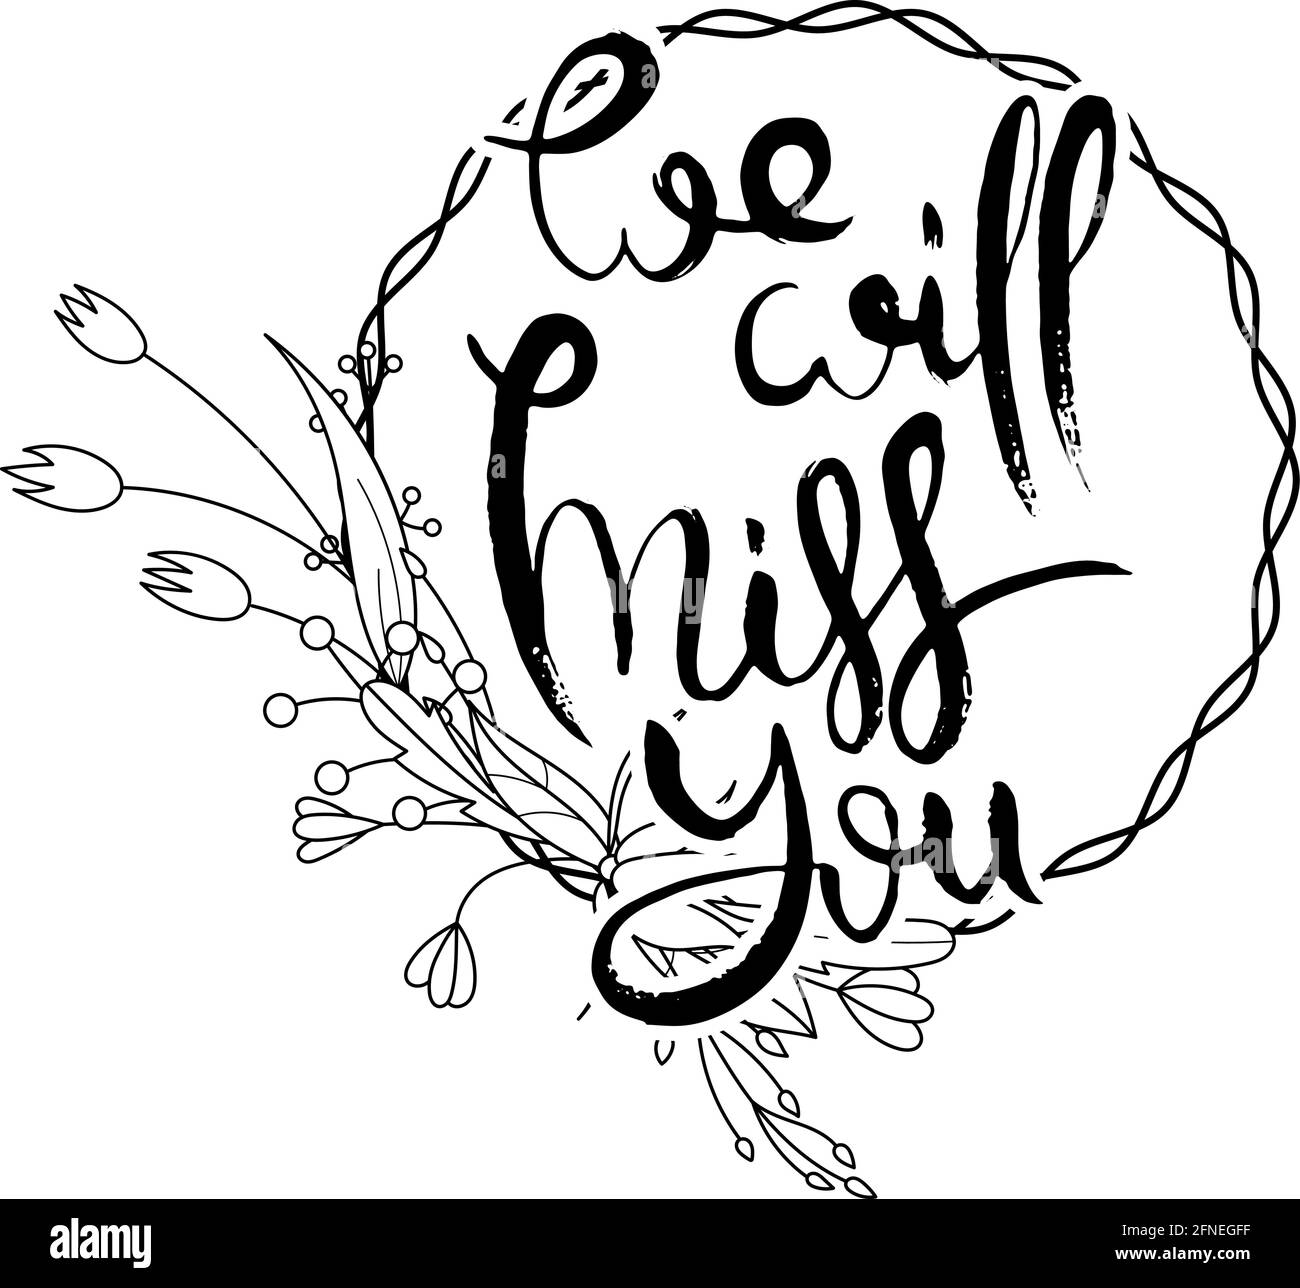 Will Miss You Stock Vector Images Alamy